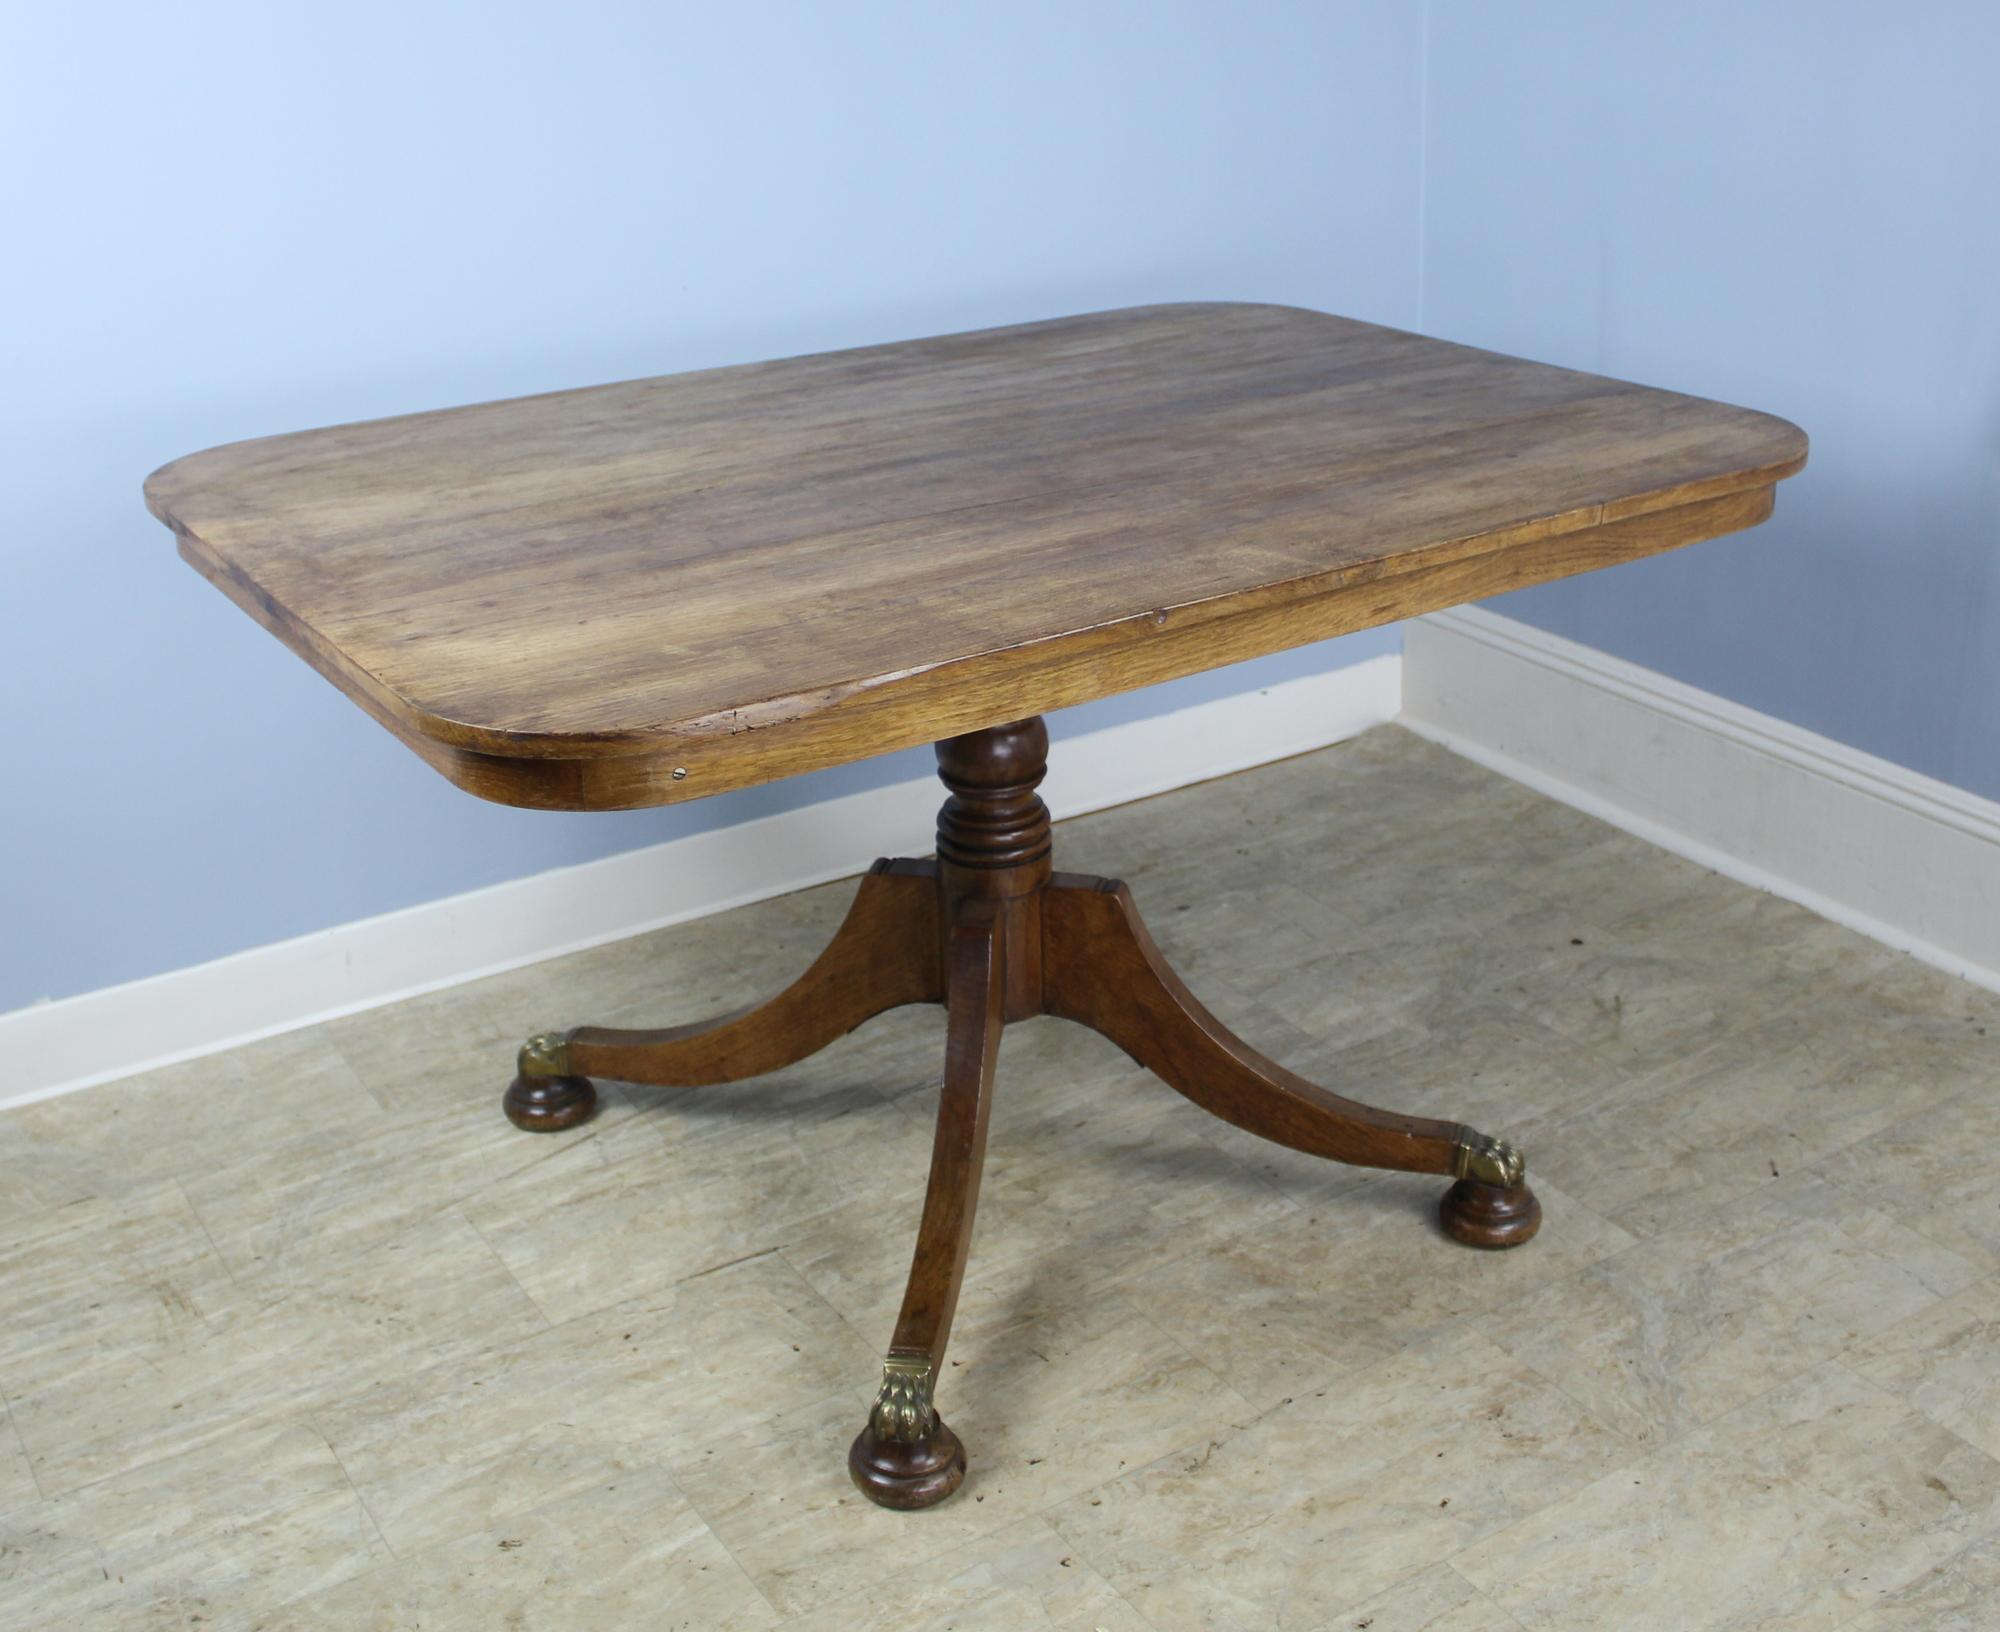 A versatile gaming or breakfast table with a tilt-top mechanism for easy storage. The generously proportioned top has a smooth oak grain and lovely patina. The flared pedestal base and stylized brass feet bring true elegance. The latch to open and